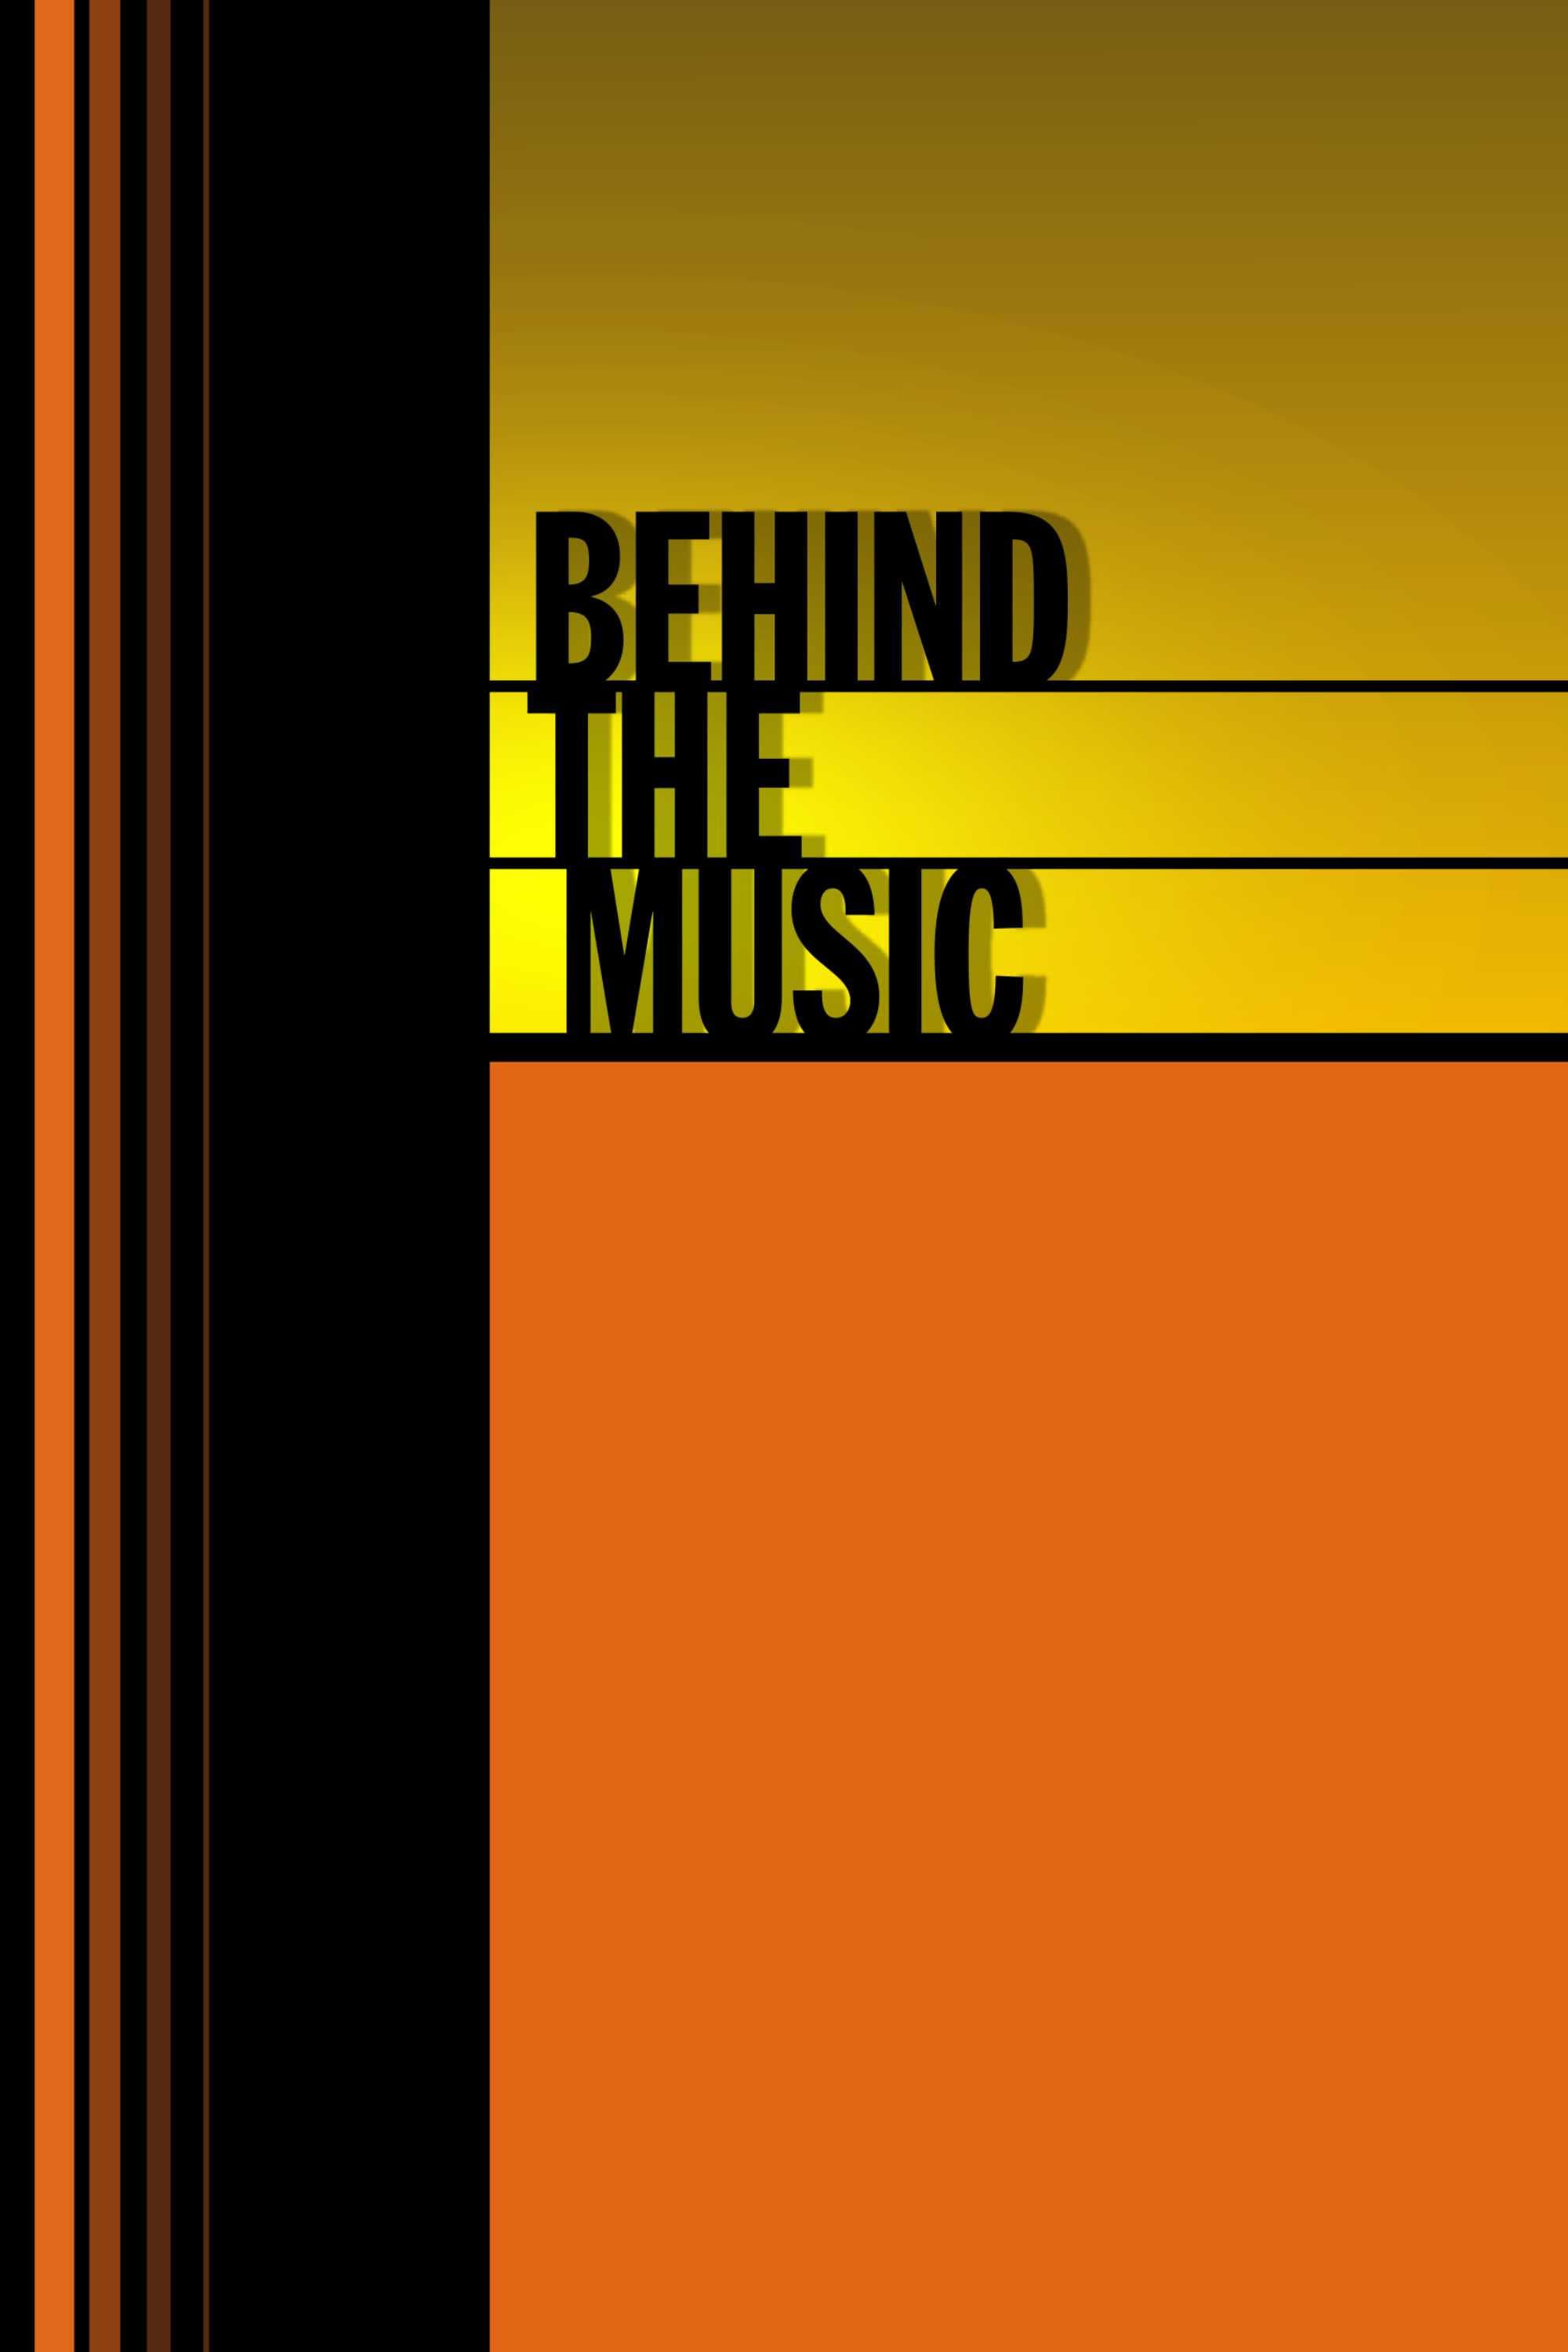 Behind the Music poster